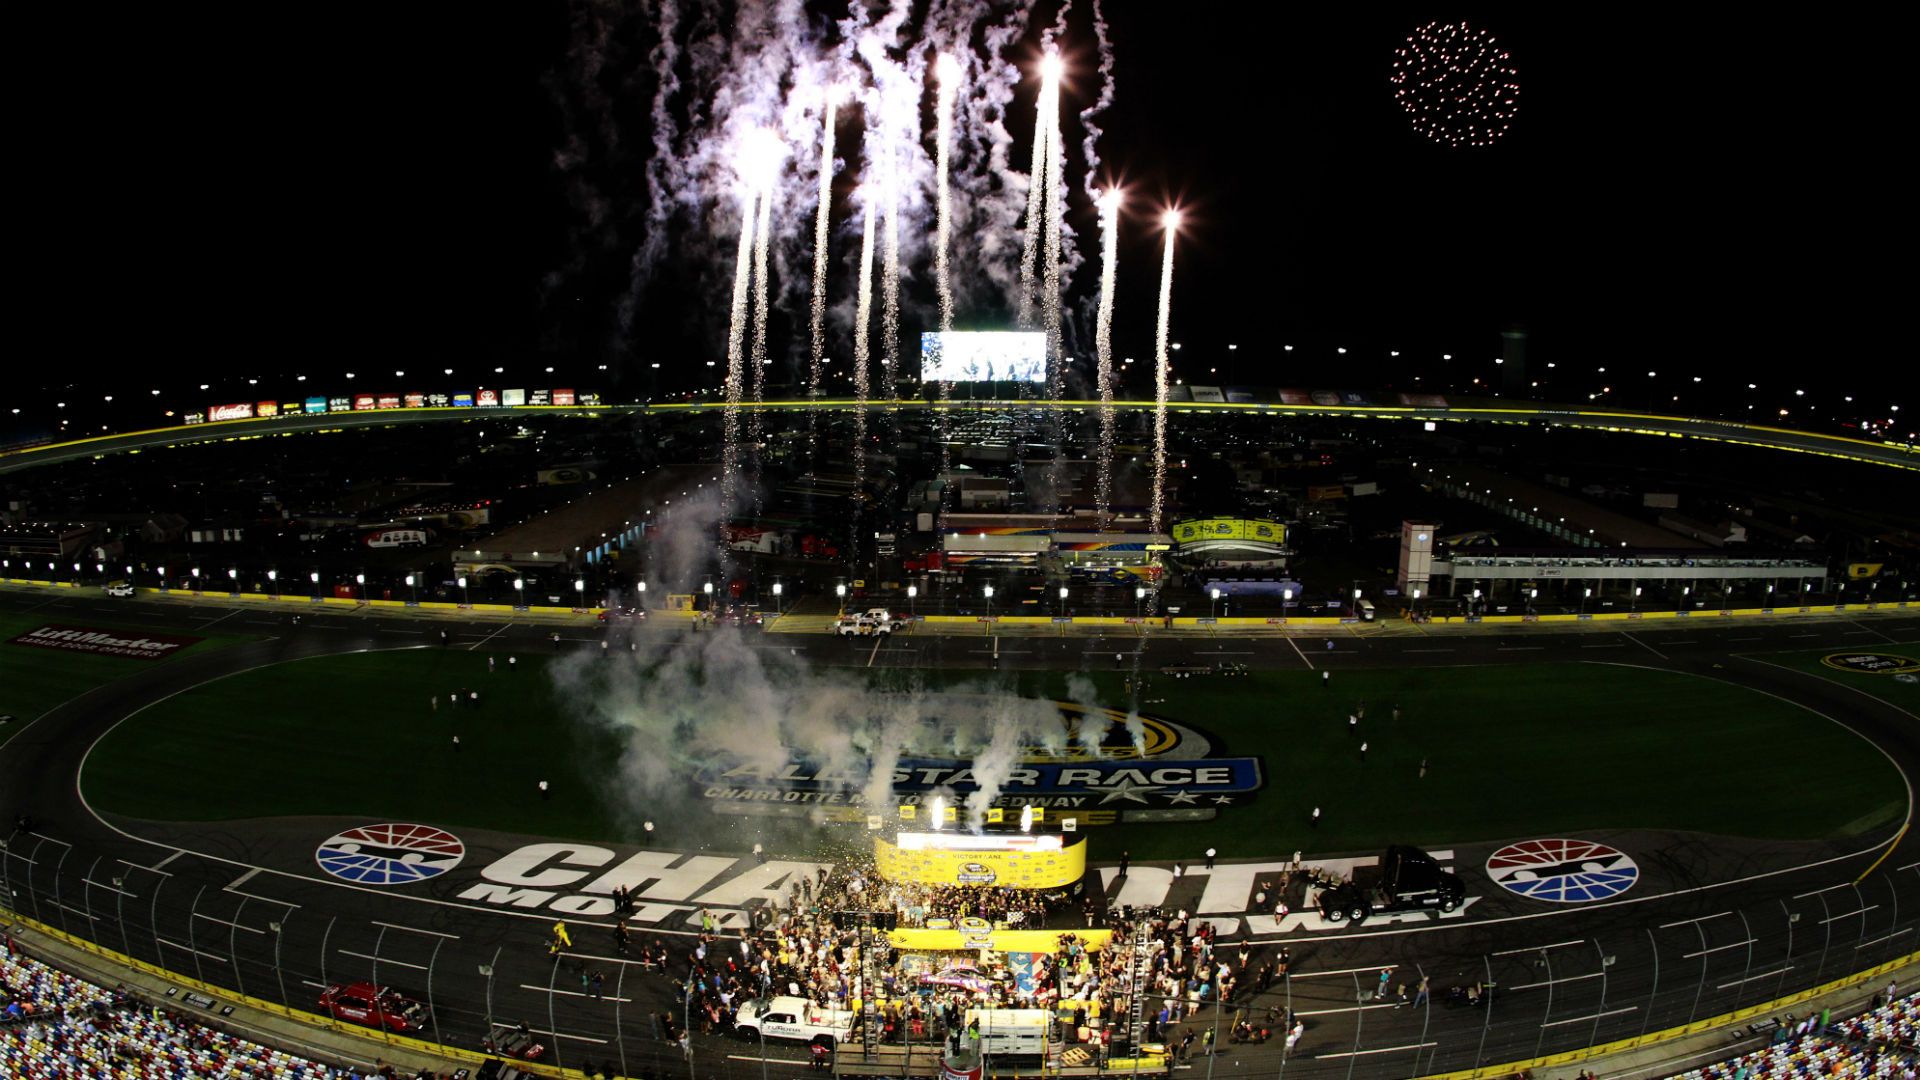 Coca Cola 600 At Charlotte Motor Speedway: Schedule, Time, TV Info